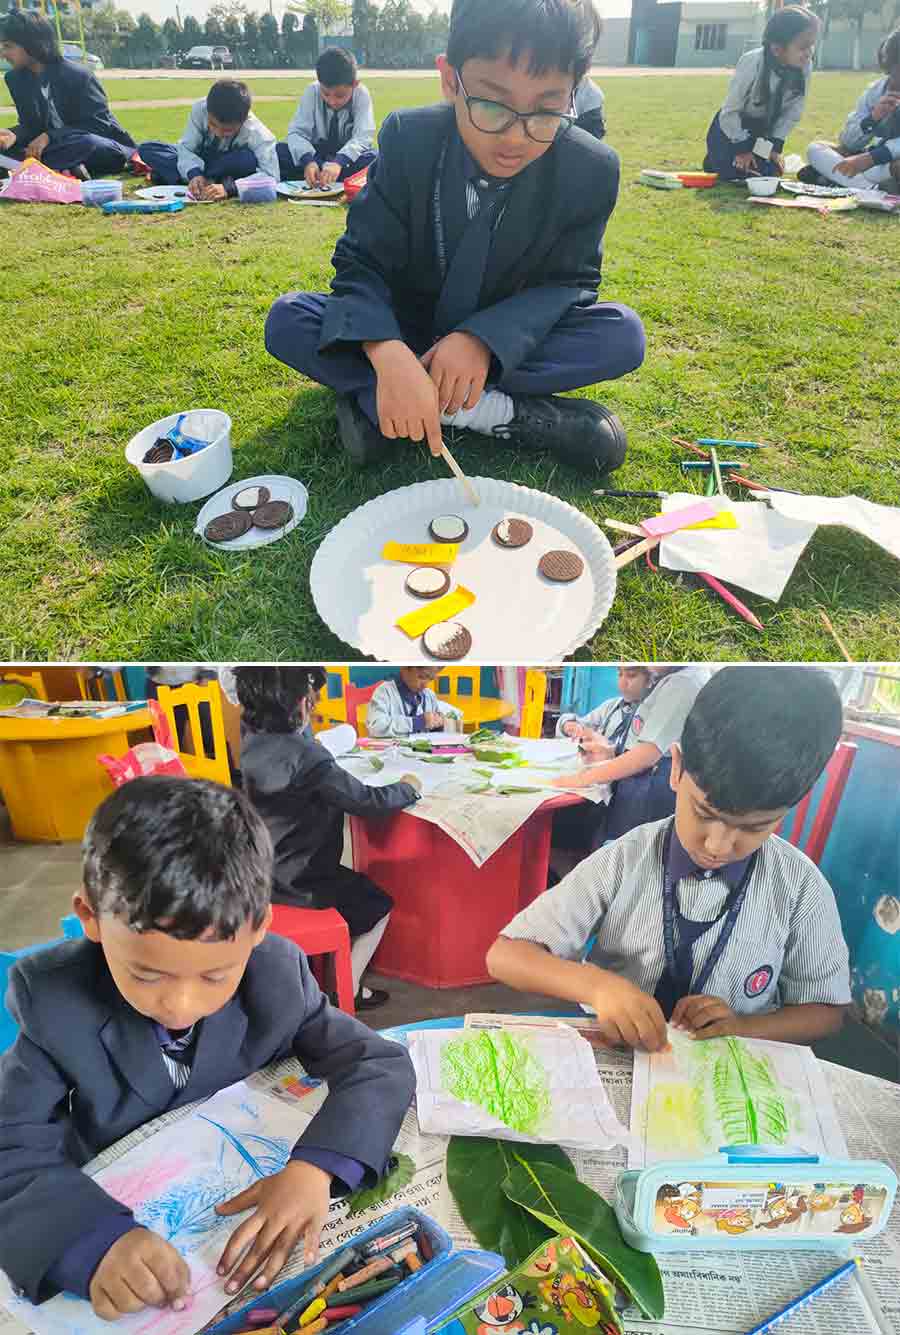 On National Science Day, Techno India Group Public School-Garia held fun educational activities like crayon leaf printing, crafting various phases of the moon using Oreo biscuits and more for the children  